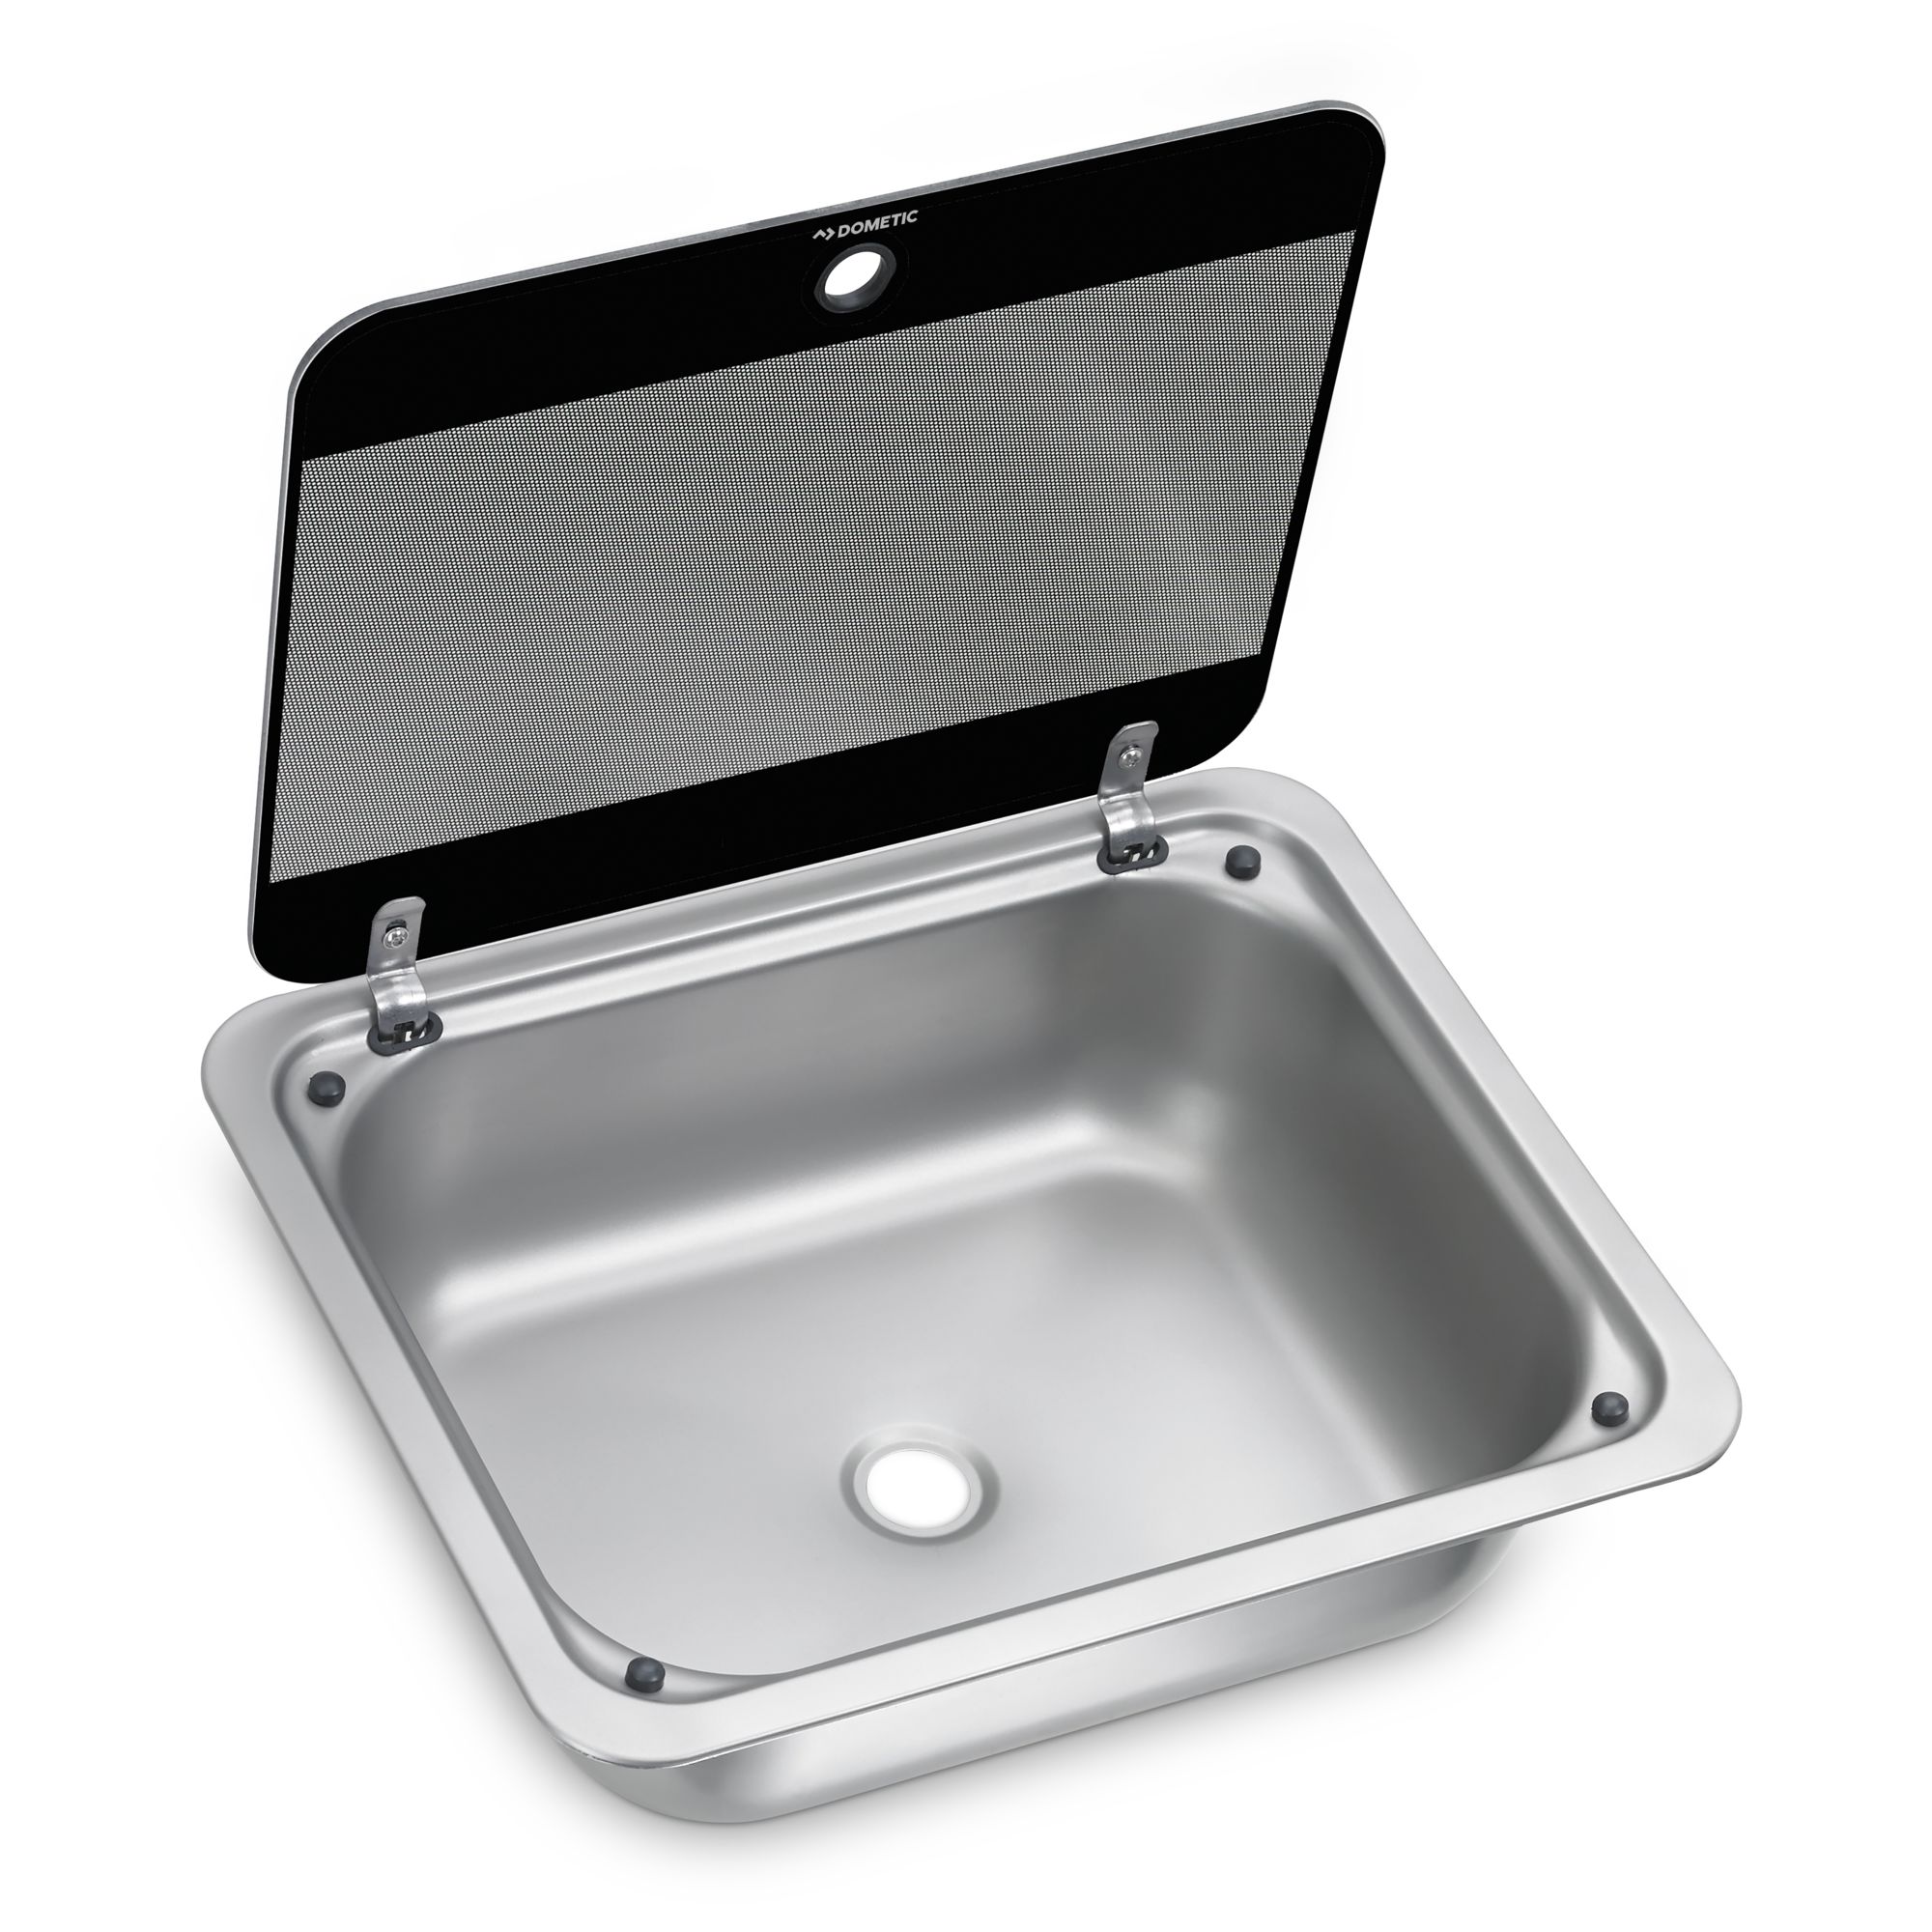 Dometic SNG 4133 stainless steel sink, 410 x 335 mm, with safety glass lid